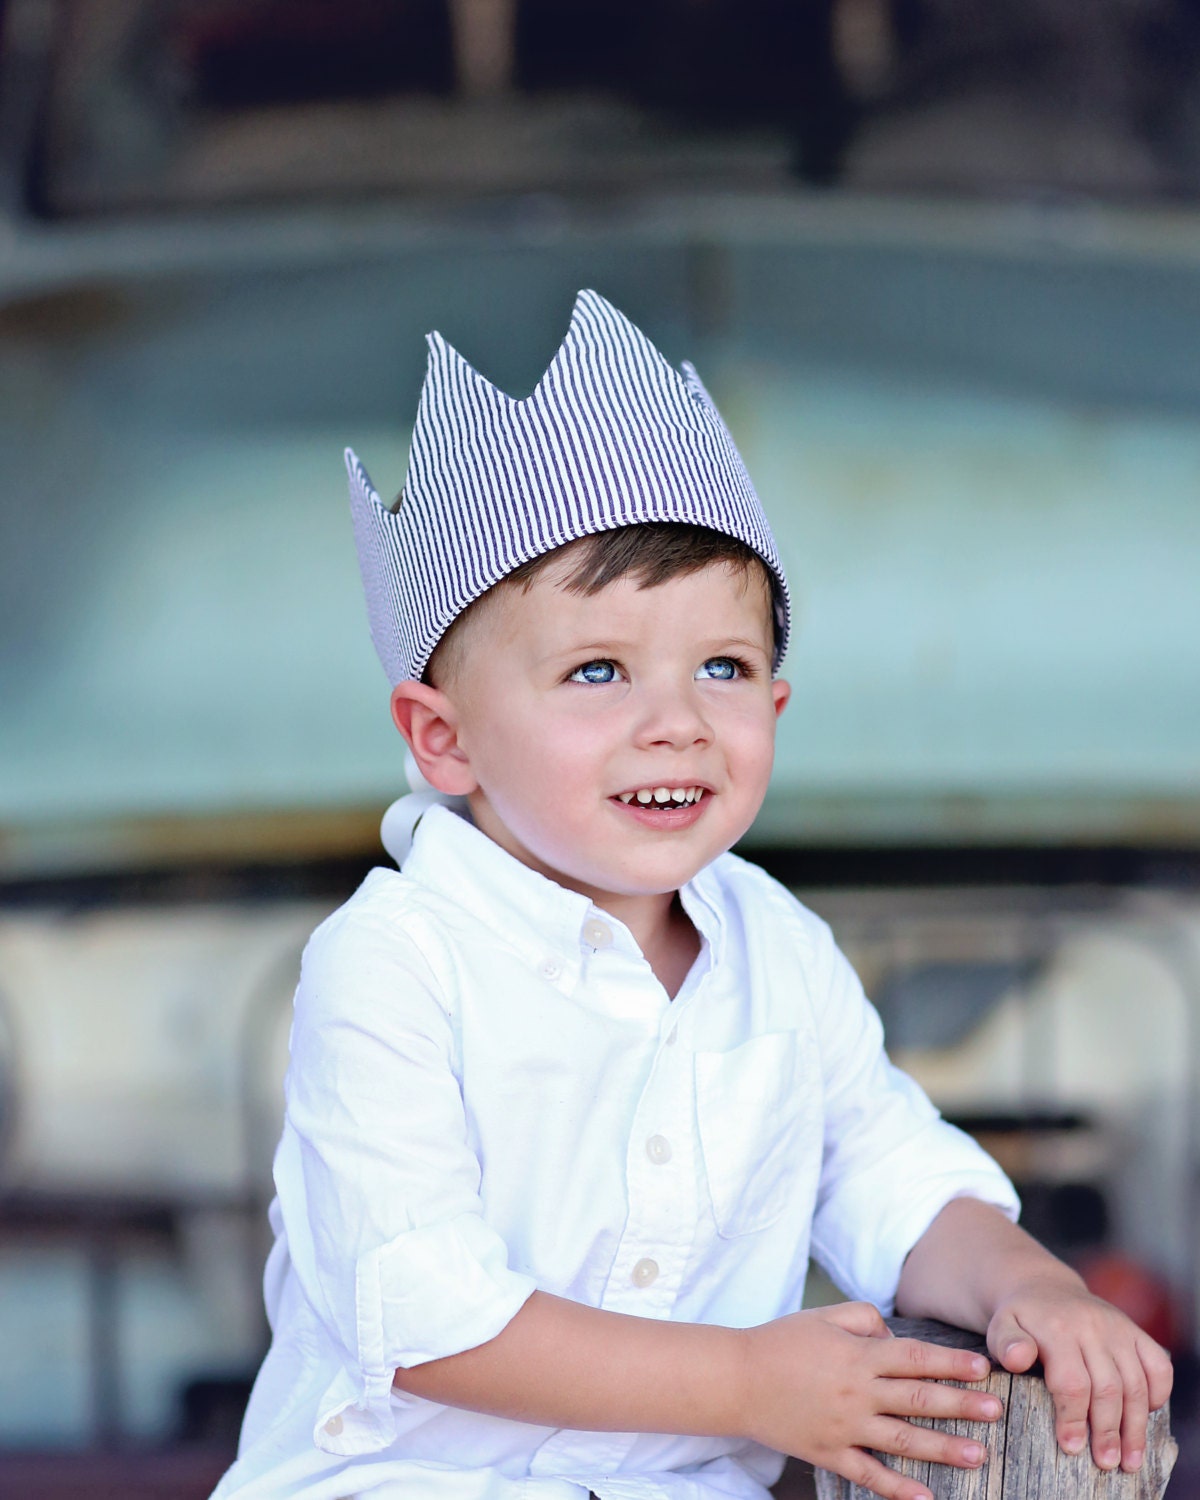 Dress Up Crown - Sequin Crown - Birthday Crown - Gray Polka Dots Reverse Gray Stripes Crown - Fits all